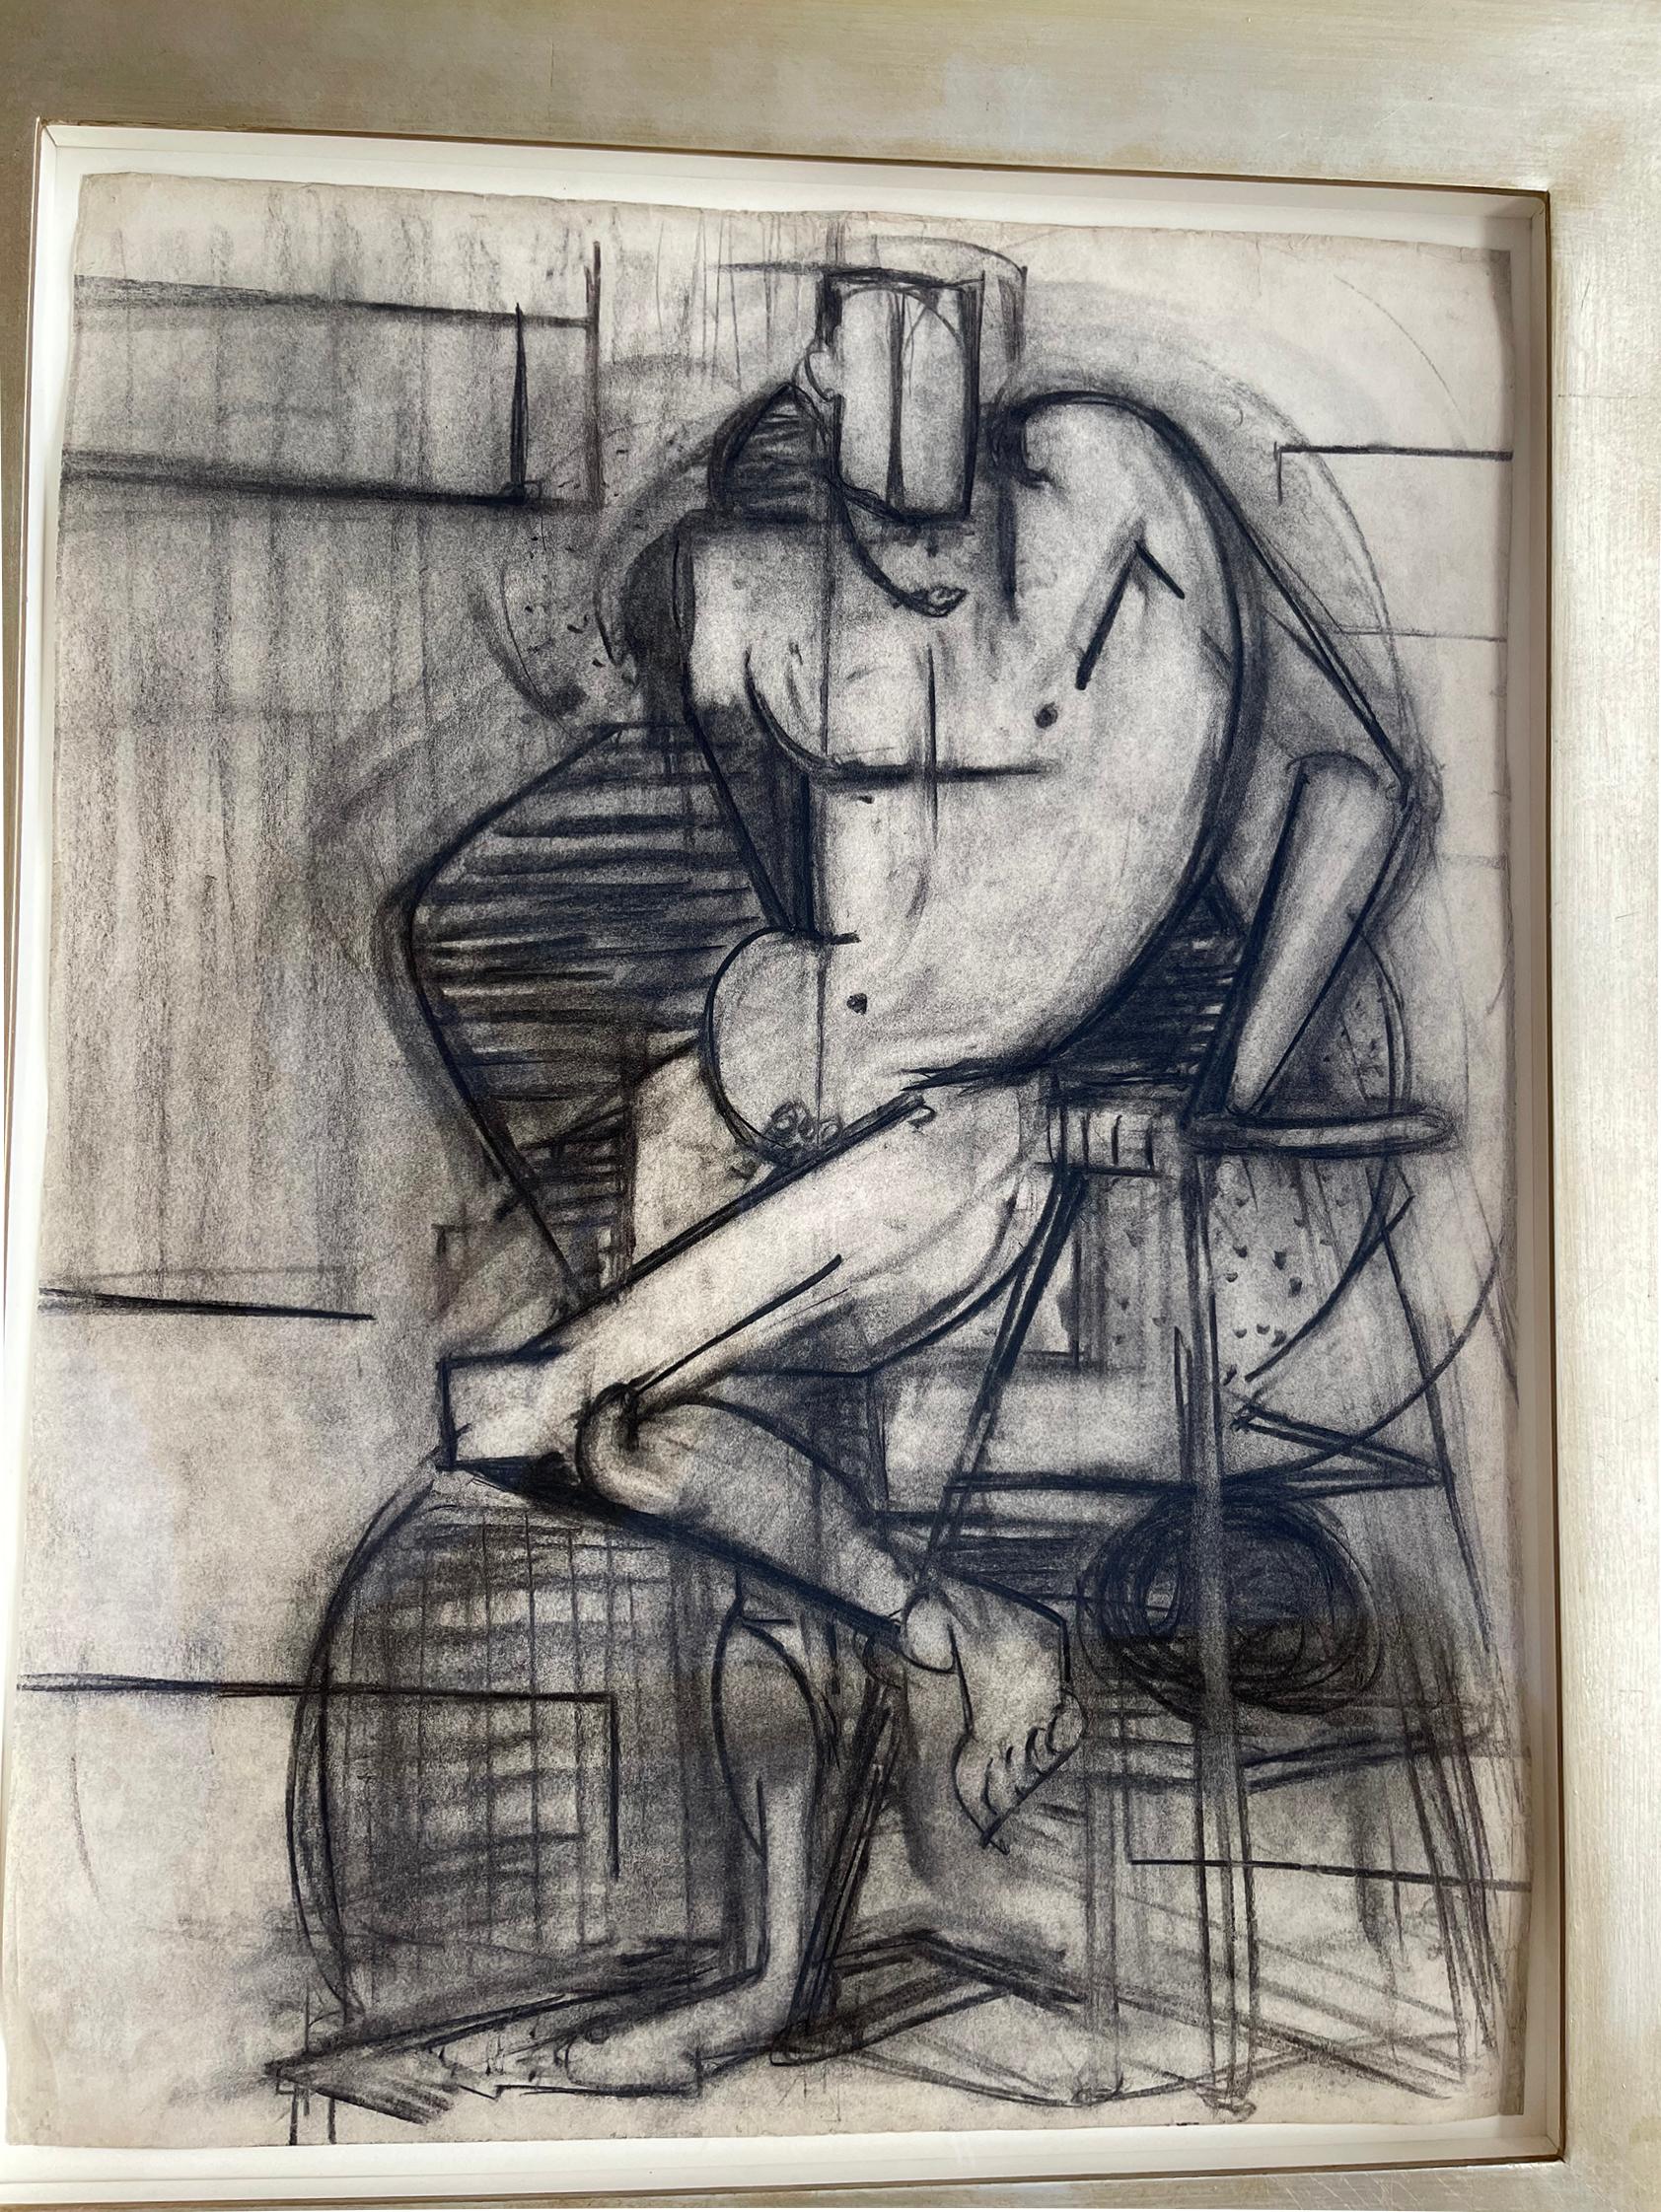 This powerful Cubist male nude is rendered in long uninterrupted bold black strokes that draw our gaze like a magnet.  Mercedes Matter was a female artist making a Cubist work but with the spontaneous speed, strength,  and intense style of an action